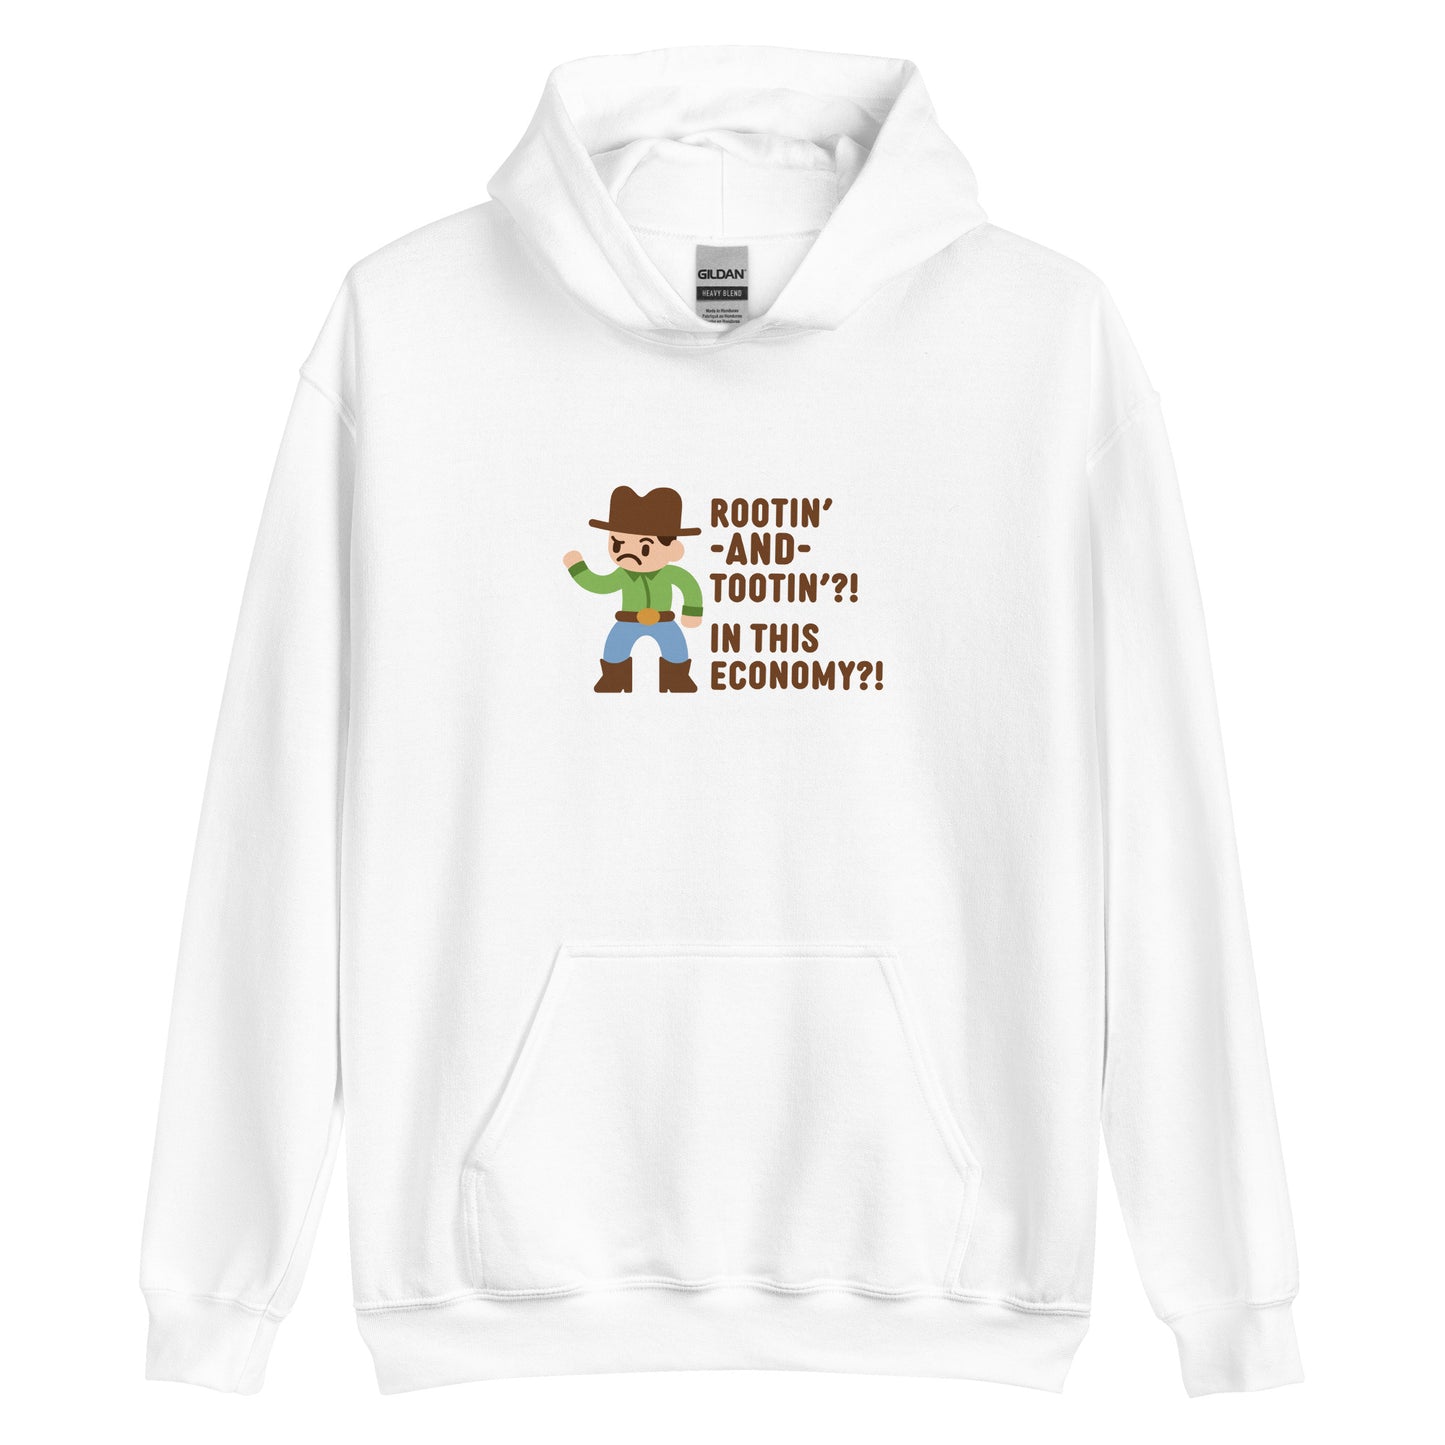 A white hooded sweatshirt featuring an illustration of a confused-looking cowboy wearing a green shirt. Text to the right of the cowboy reads "Rootin' AND tootin'?! In this economy?!"